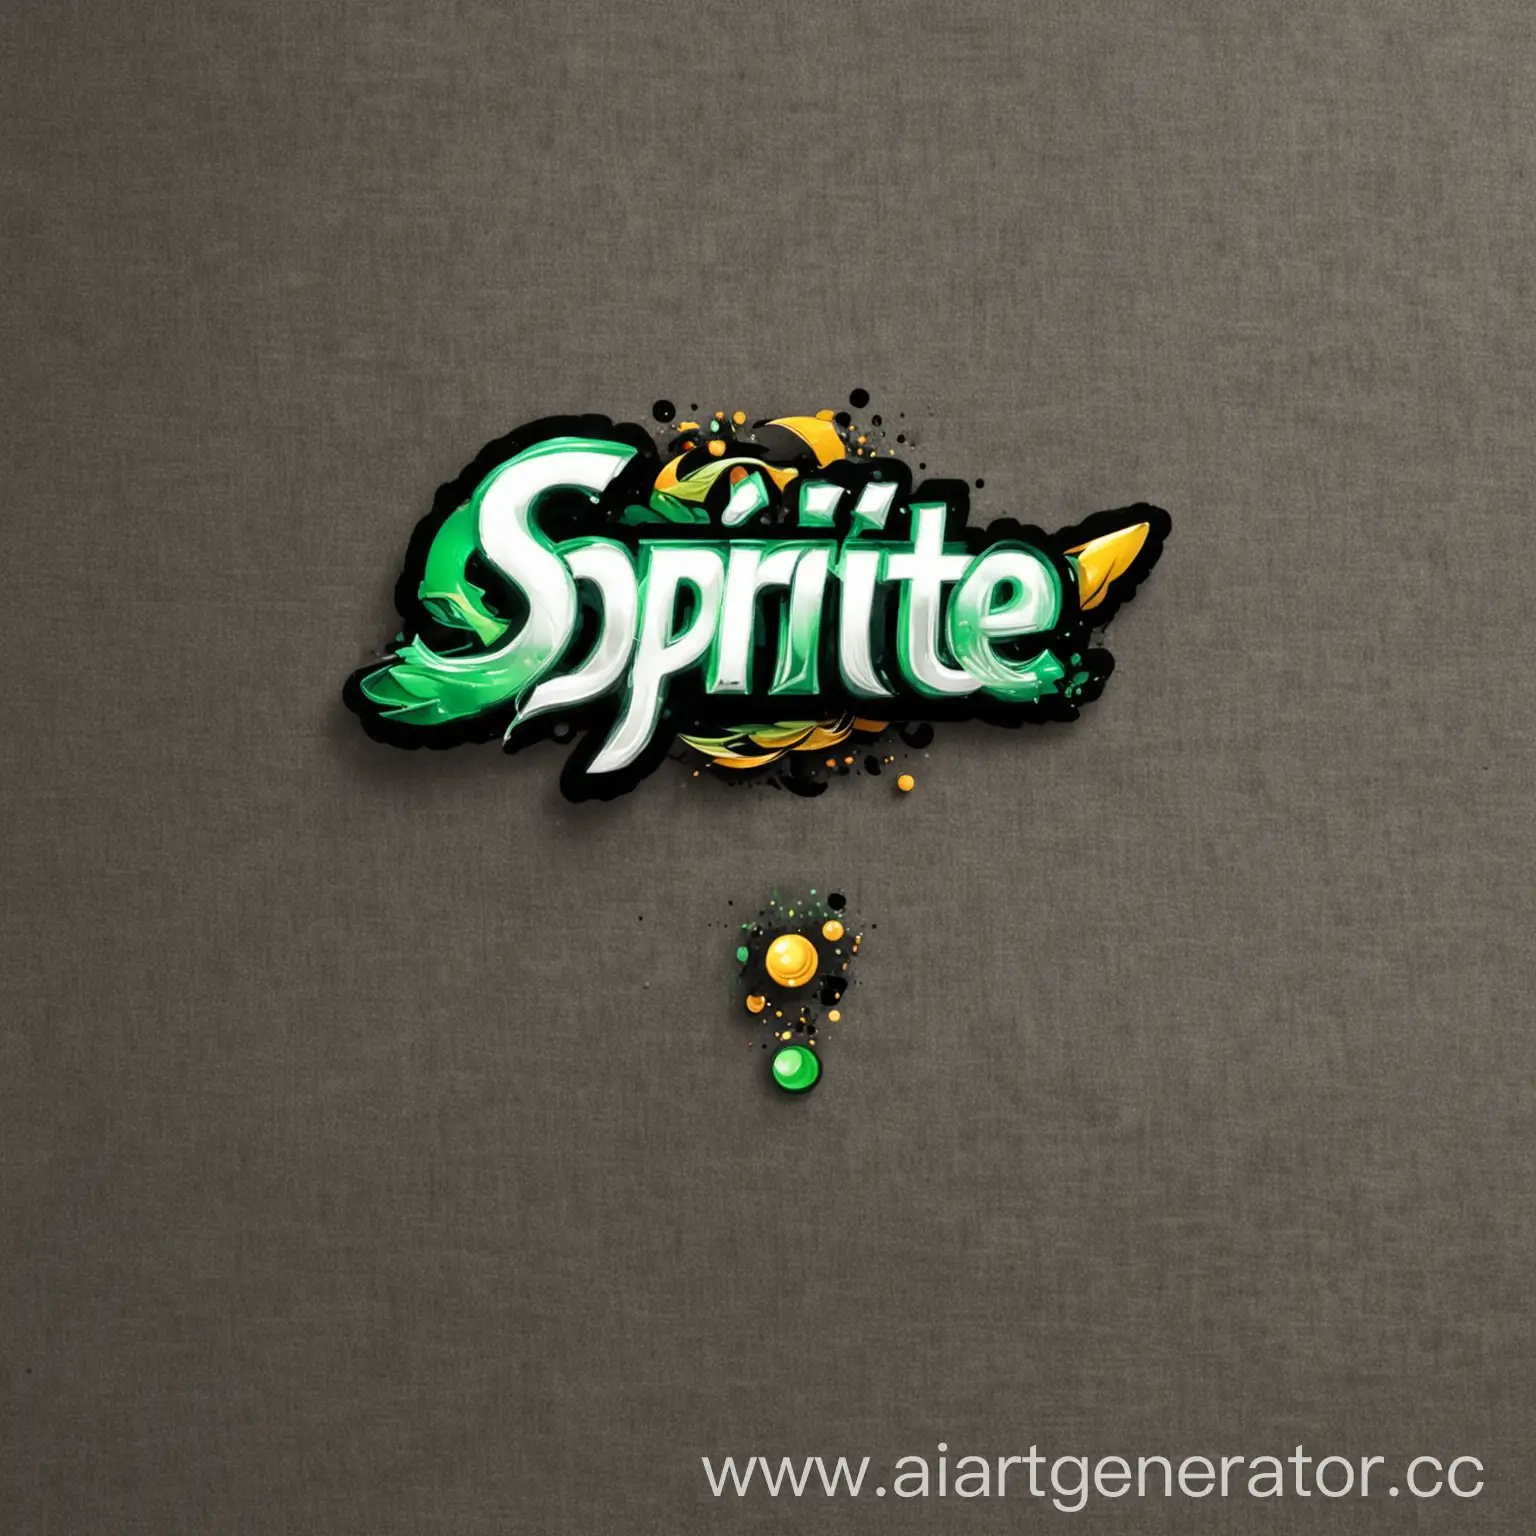 Sprite-Shop-Logo-Design-with-Vibrant-Colors-and-Playful-Elements